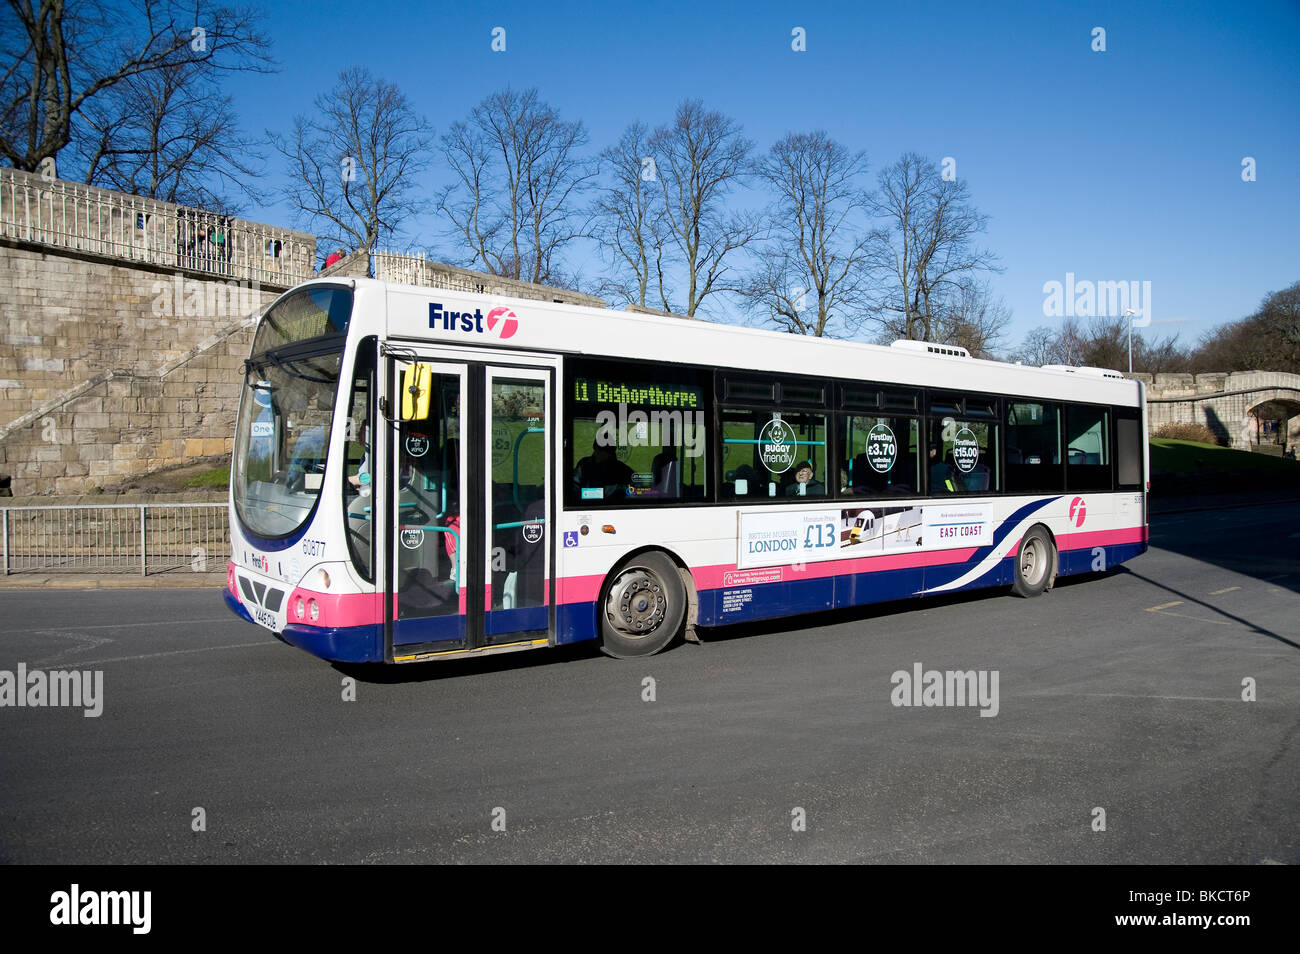 Single decker bus in First livery in York. Stock Photo